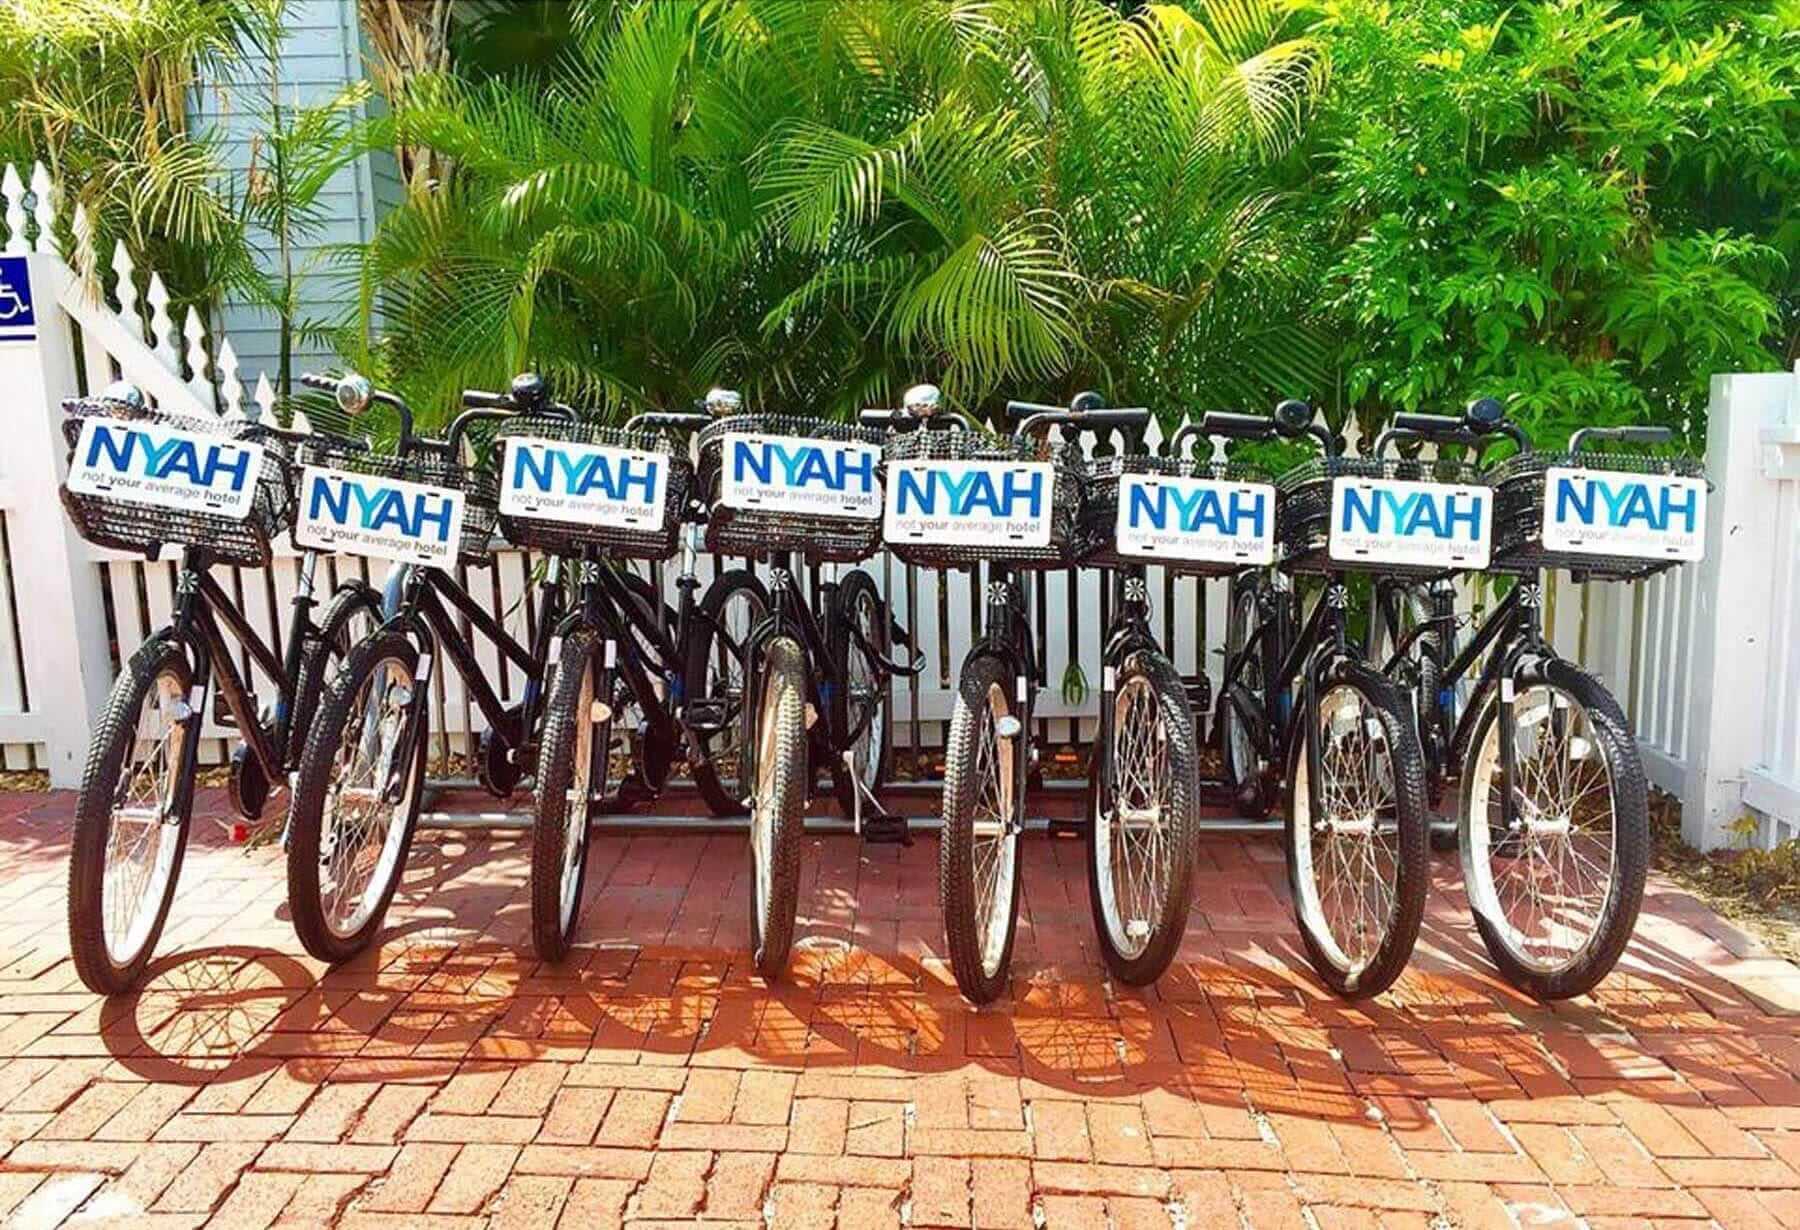 Bike rentals to check out and use to explore free things to do in Key West.